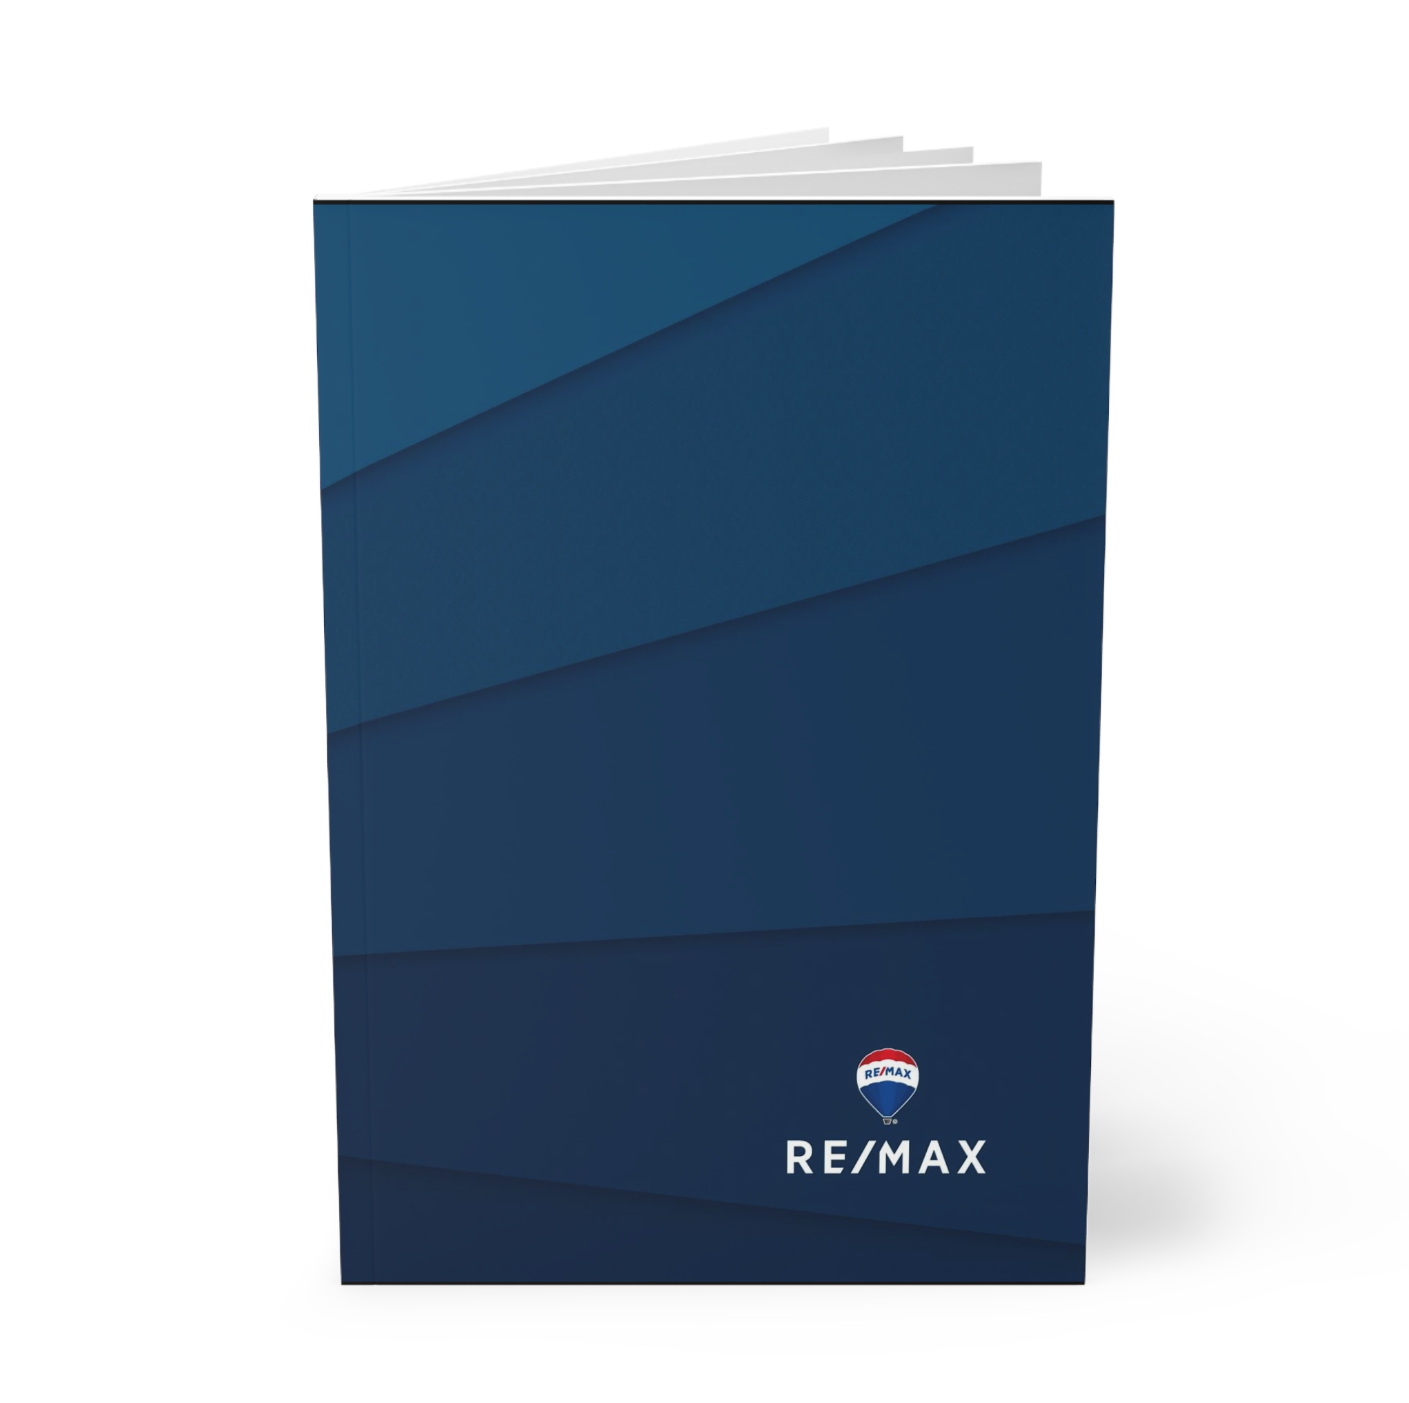 RE/MAX Full Color SoftCover Binders Blue Ombre (from as low as $6.18 per cover)